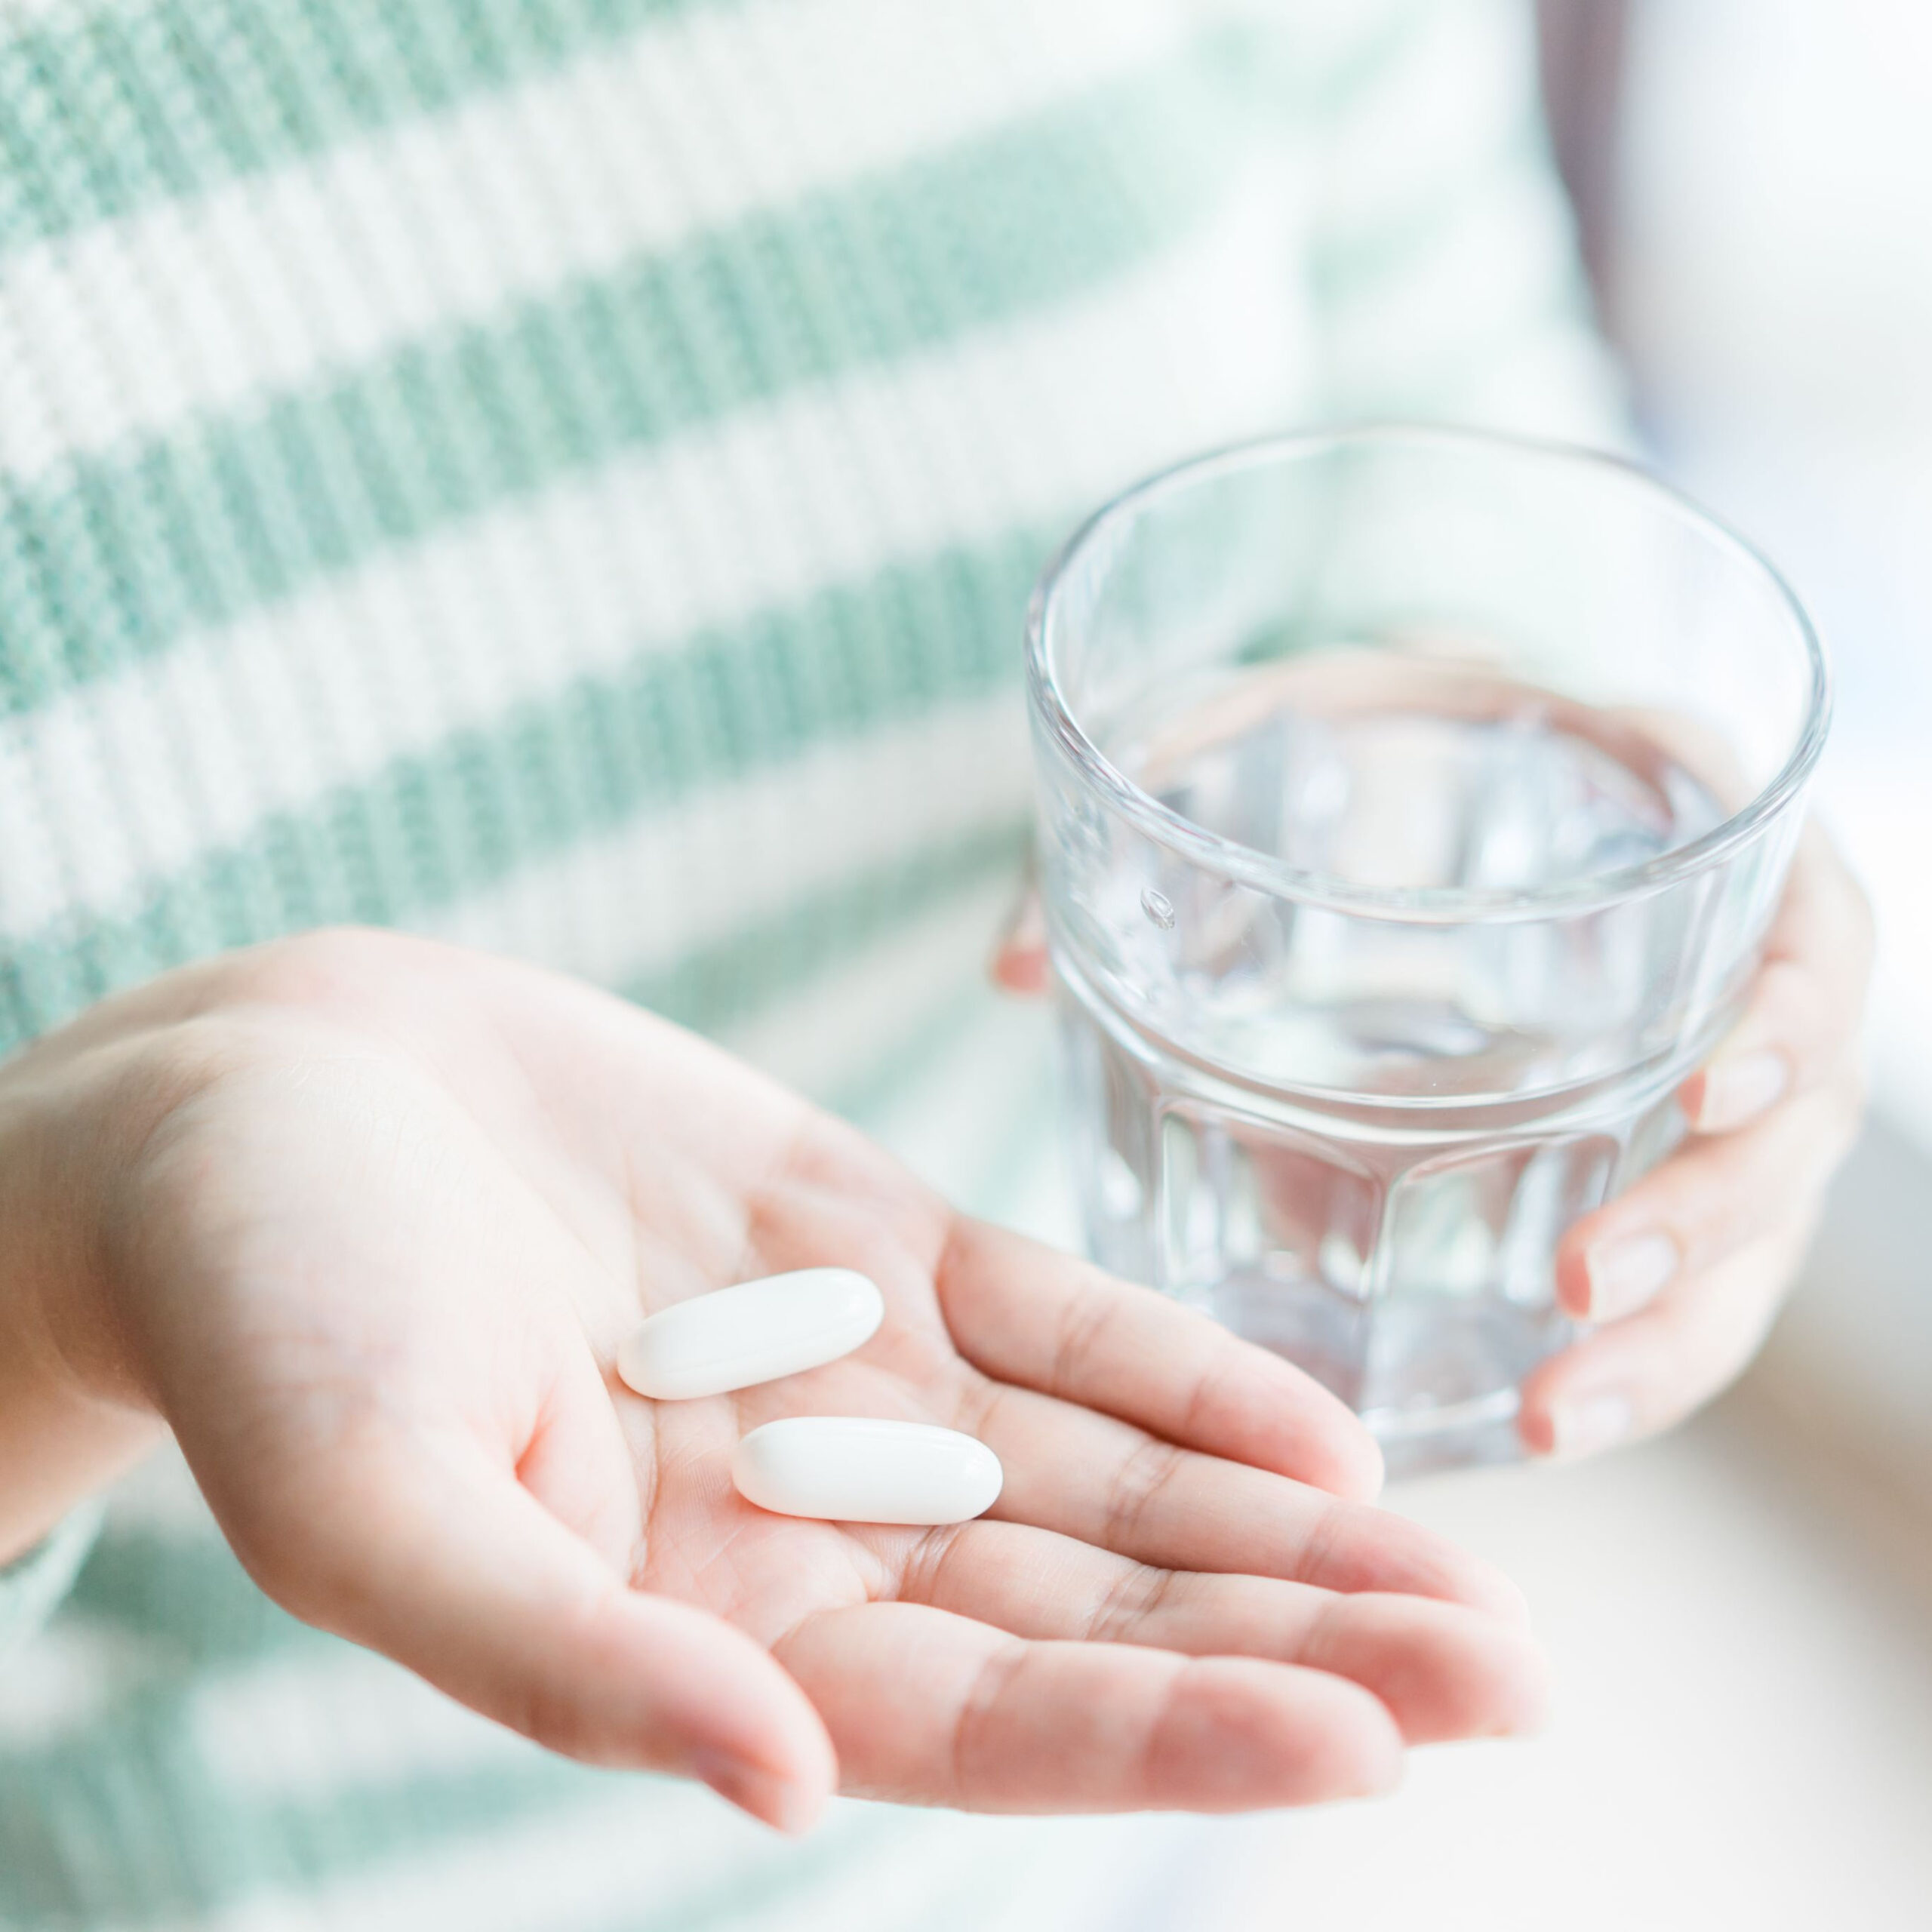 woman holding 2 vitamin d supplements and a glass of water